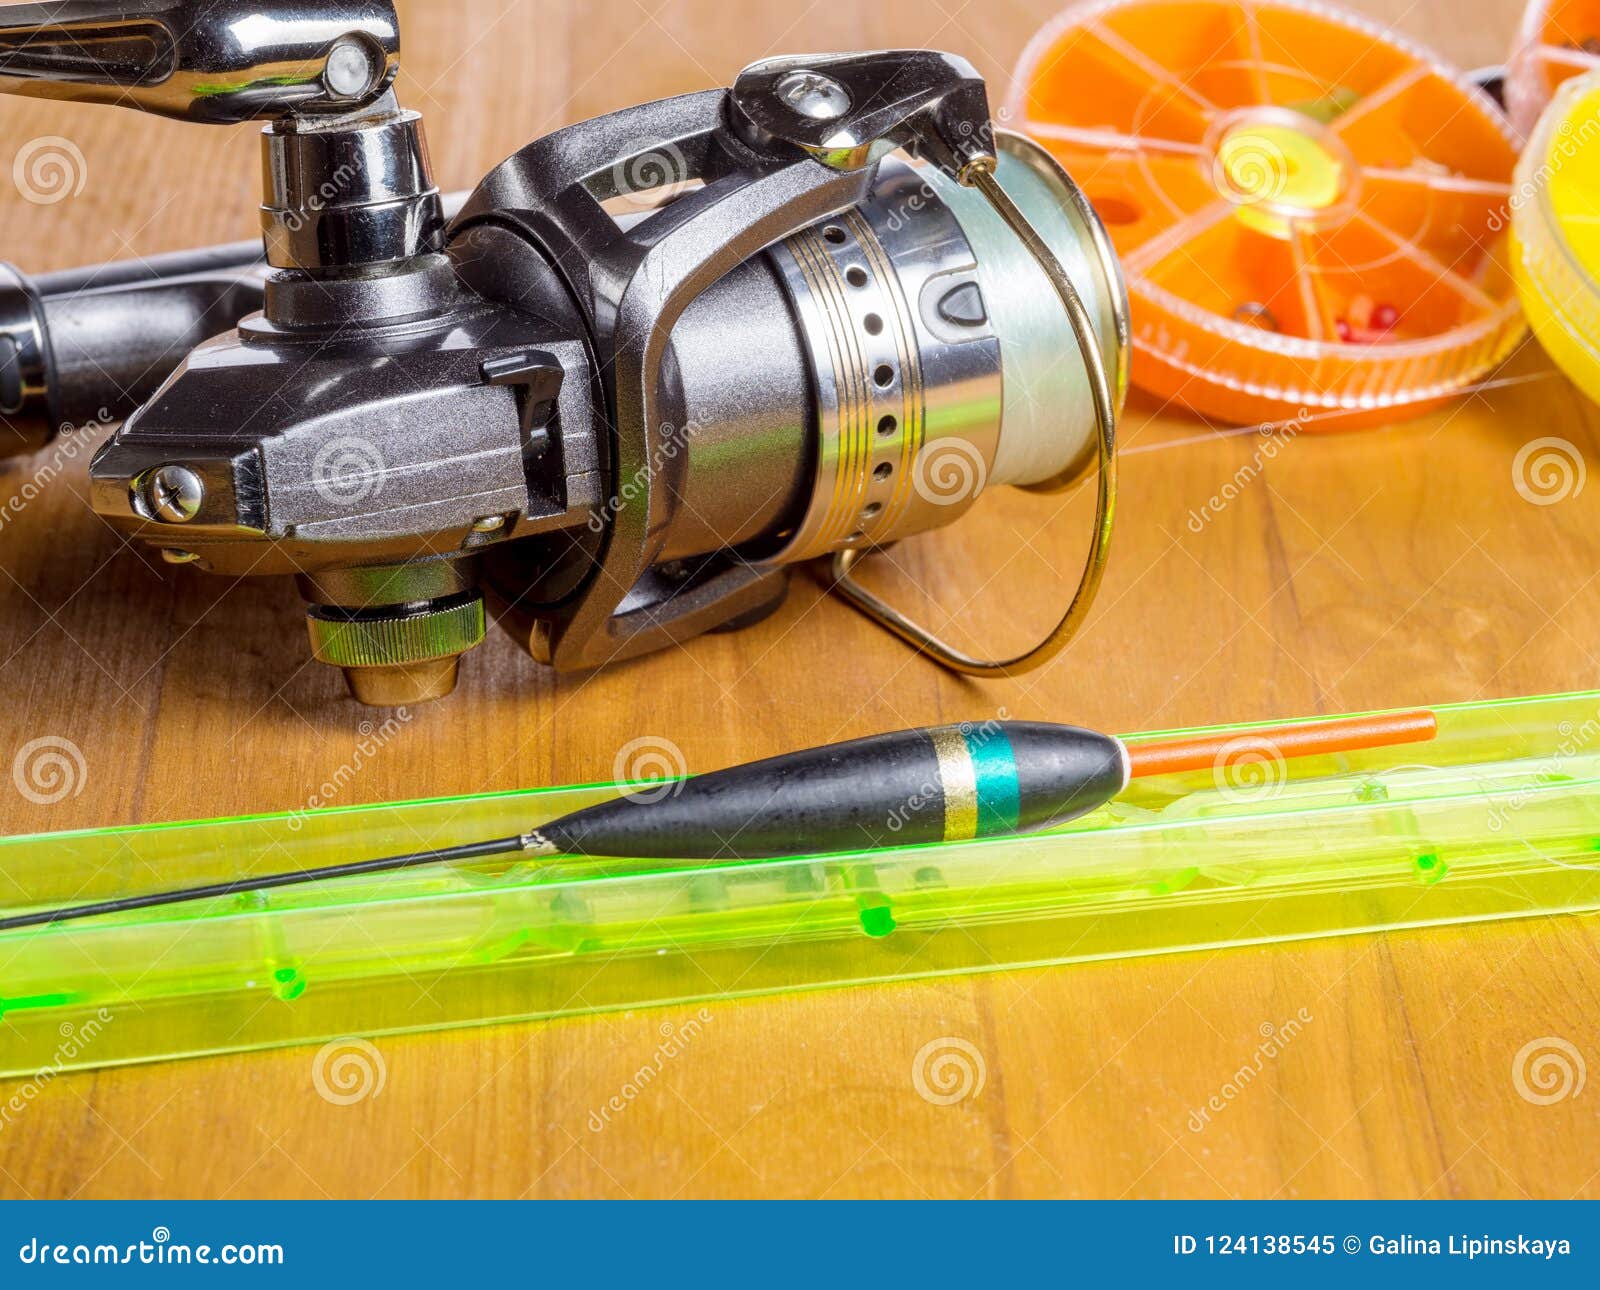 Spinning Coil and Float. Fishing Gear Stock Image - Image of spoon, lake:  124138545